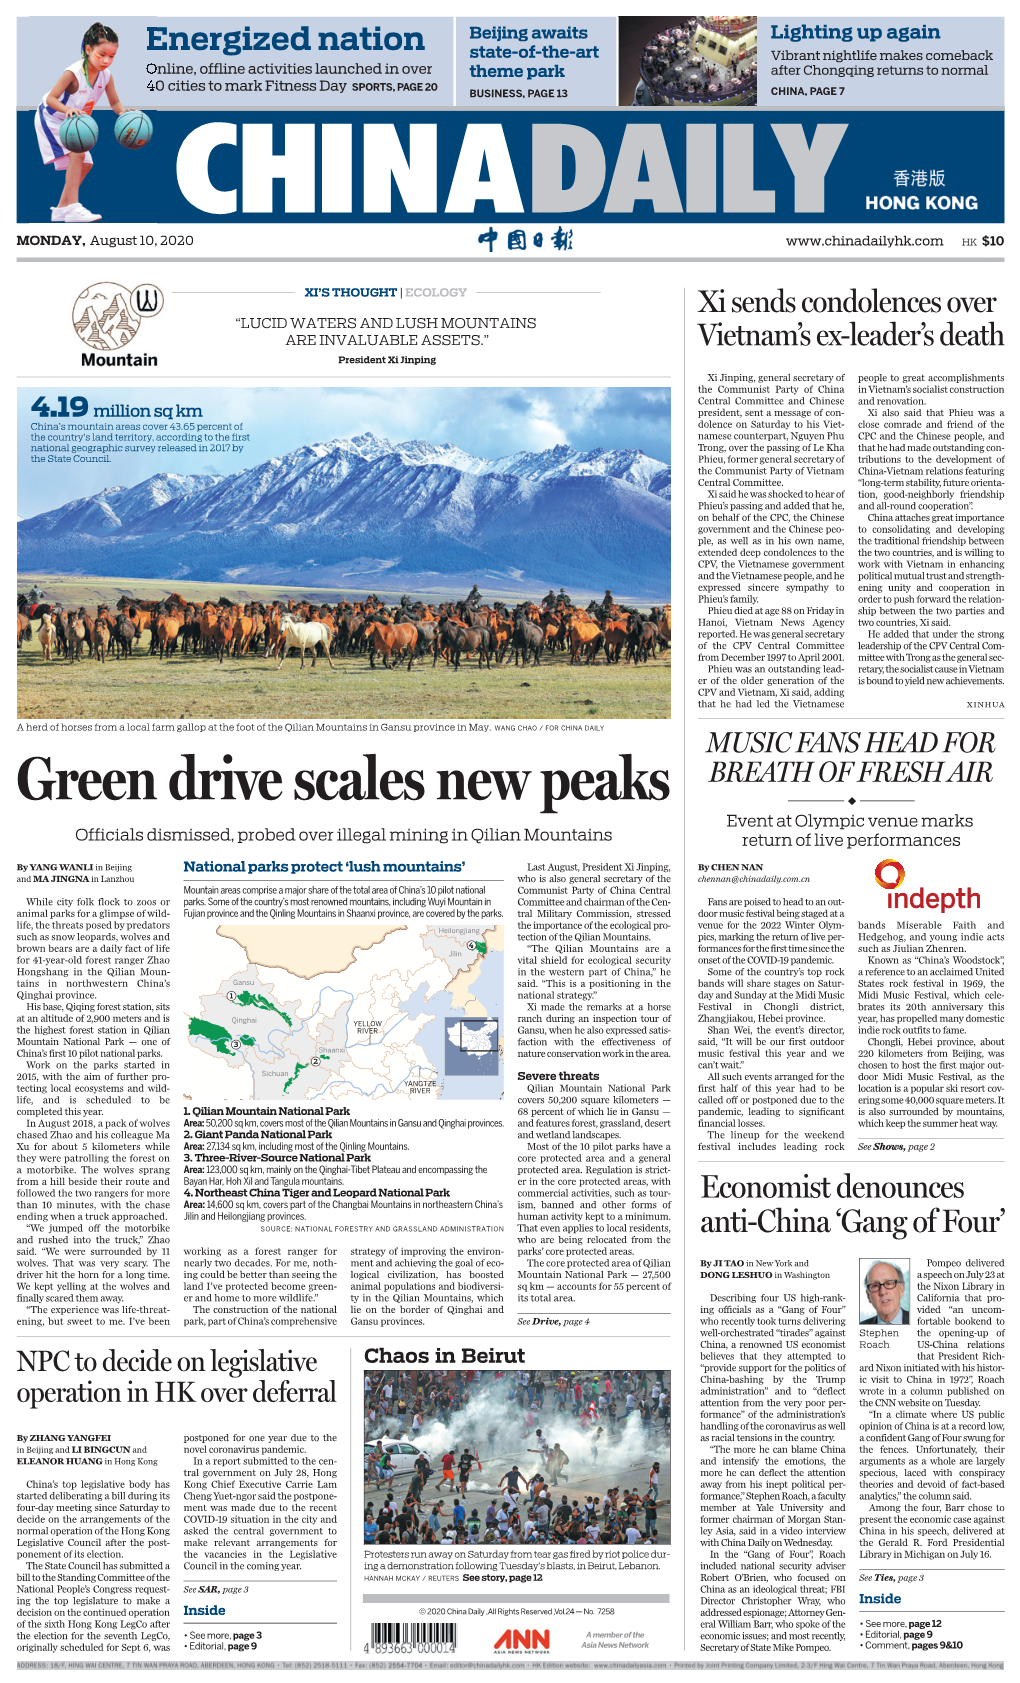 Green Drive Scales New Peaks ◆ Event at Olympic Venue Marks Officials Dismissed, Probed Over Illegal Mining in Qilian Mountains Return of Live Performances